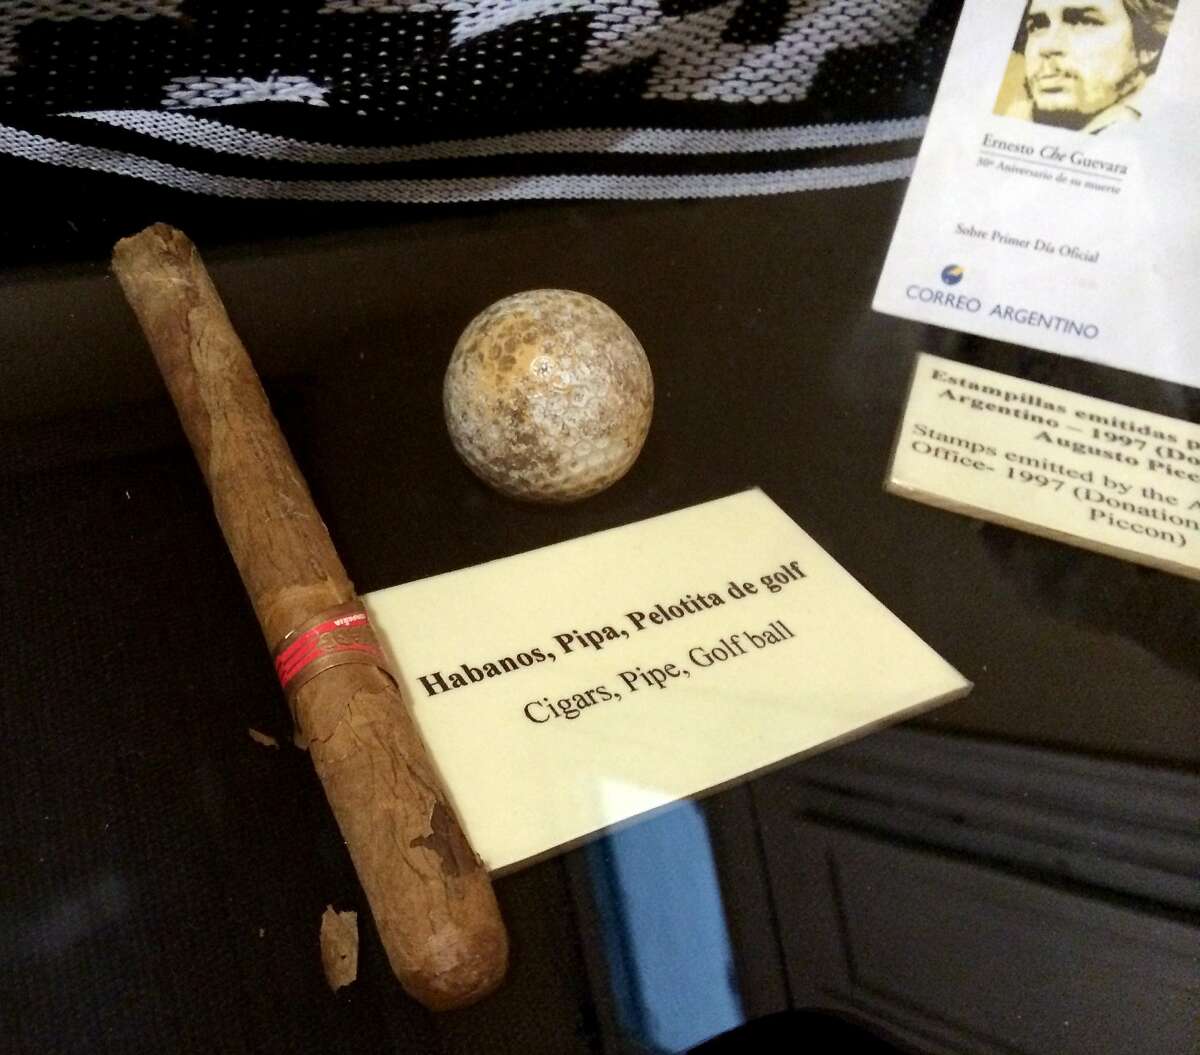 A display at the Museo Casa del Che in Alta Gracia, Argentina, that includes one of the revolutionary's trademark cigars.